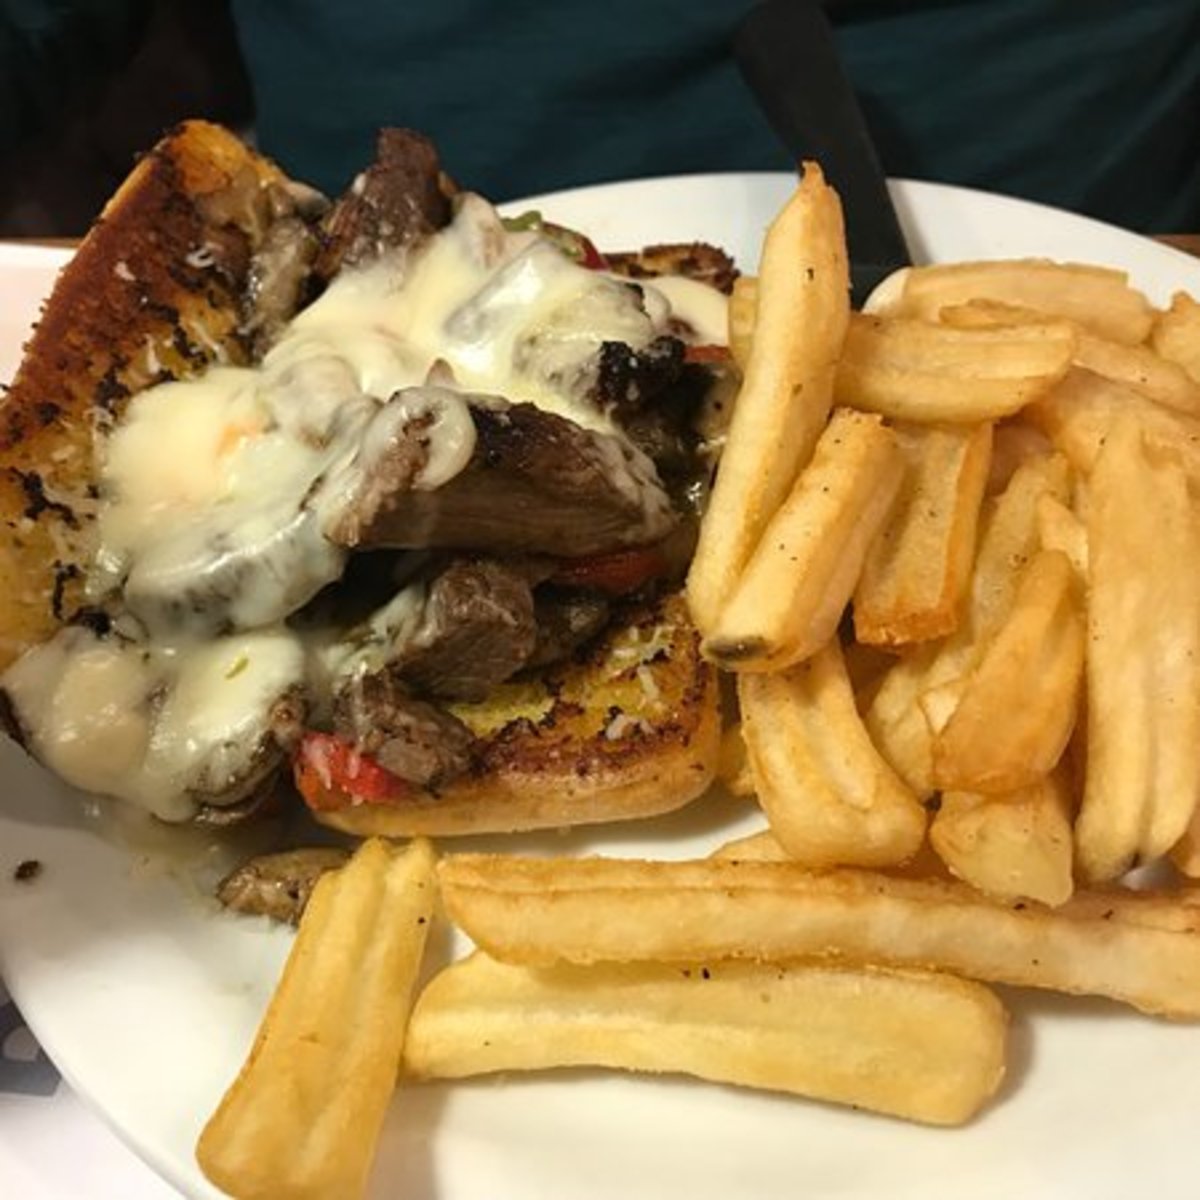 Denny's version of the cheesesteak